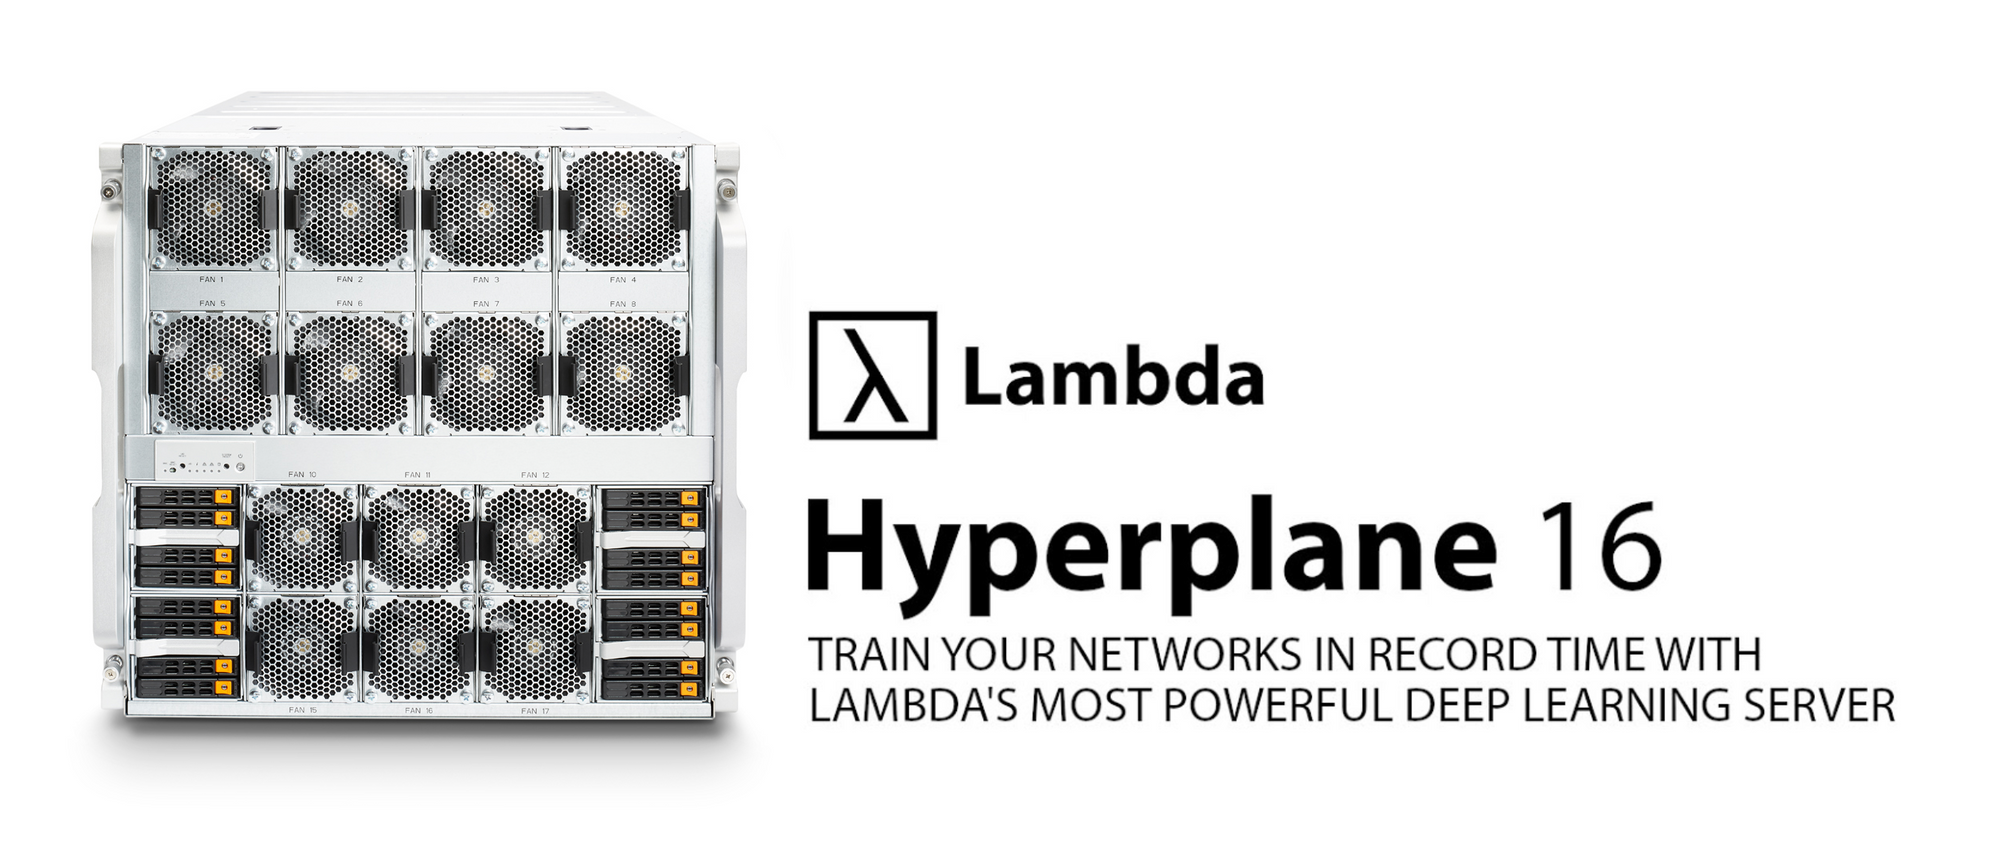 Header image: Train you networks in record time with Lambda's most powerful deep learning server.